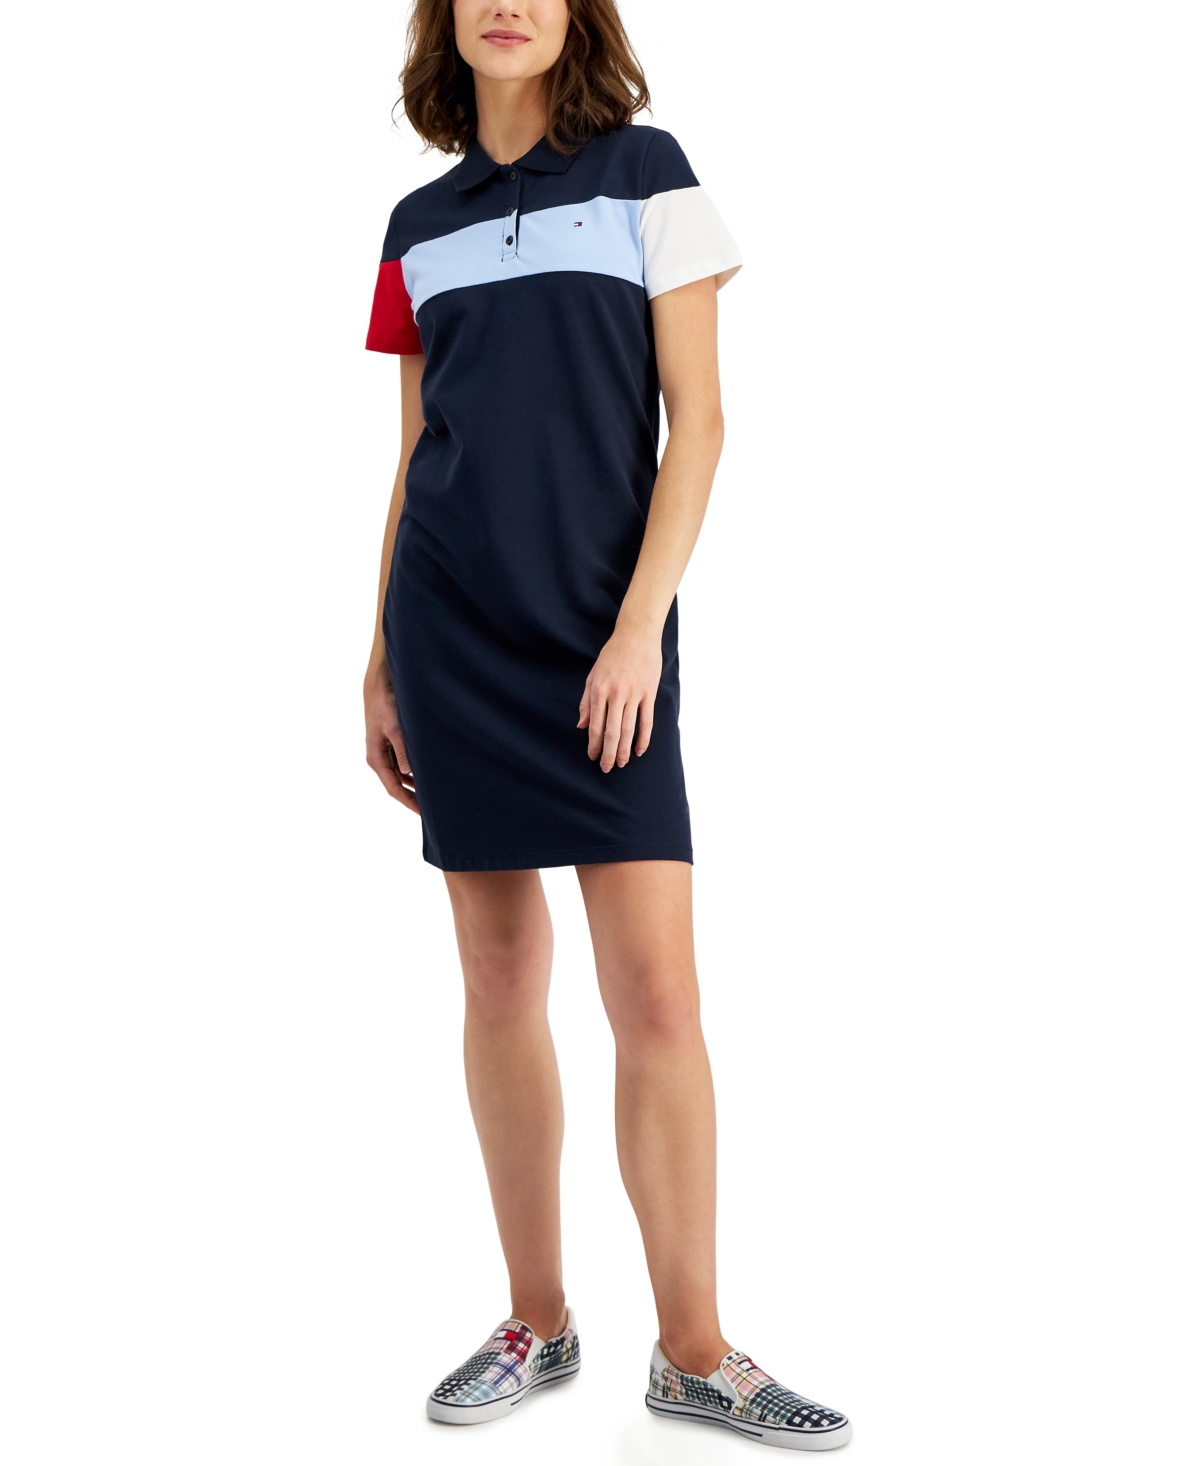 TOMMY HILFIGER WOMEN'S SHORT-SLEEVE COLORBLOCKED POLO DRESS